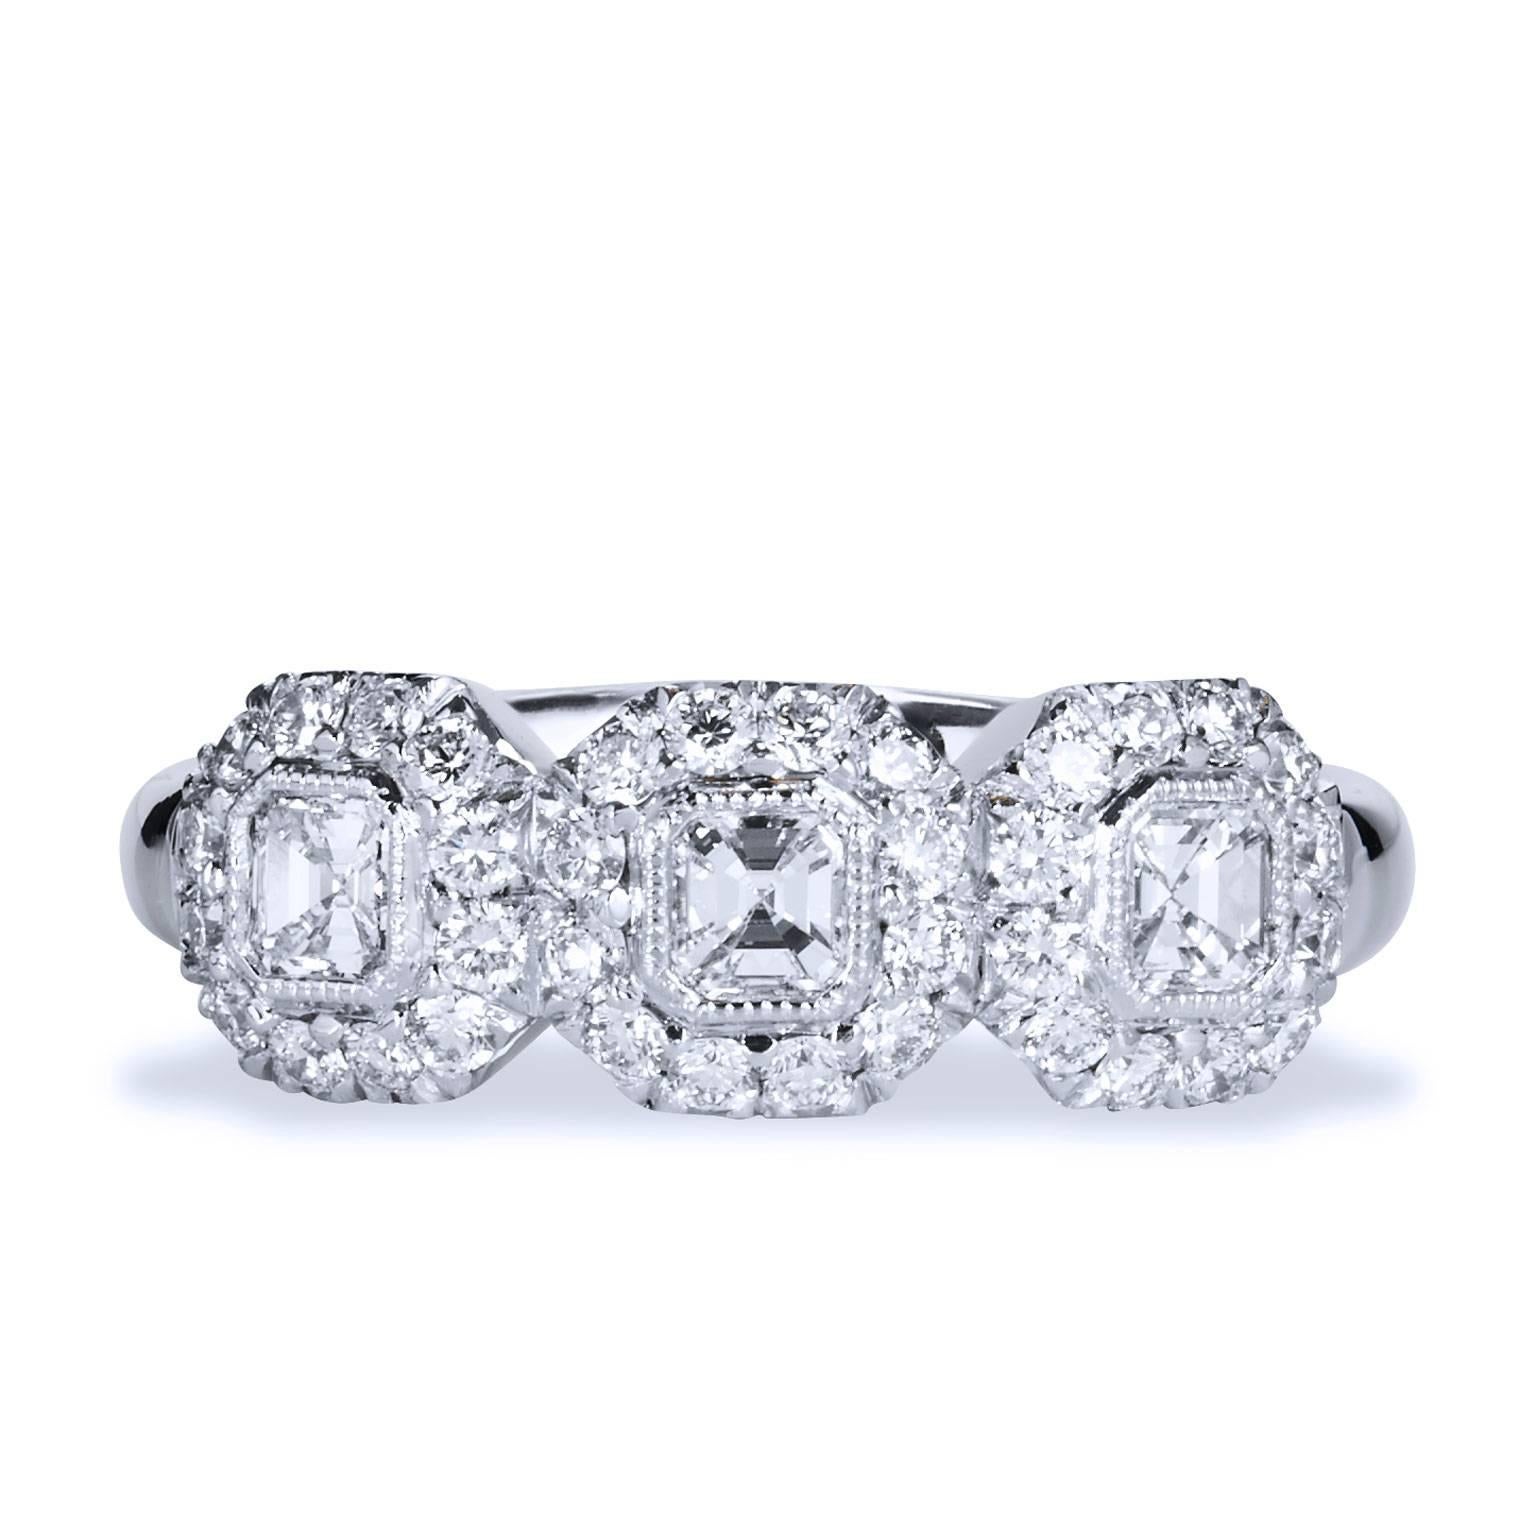 This stylish three stone ring Designed by H features 3 square Emerald Cut diamonds weighting 0.47cts F/G VS1 and 0.44ct pave-set diamonds surrounding the three emerald cut diamonds. This 18kt White gold with palladium ring size 6 1/4.